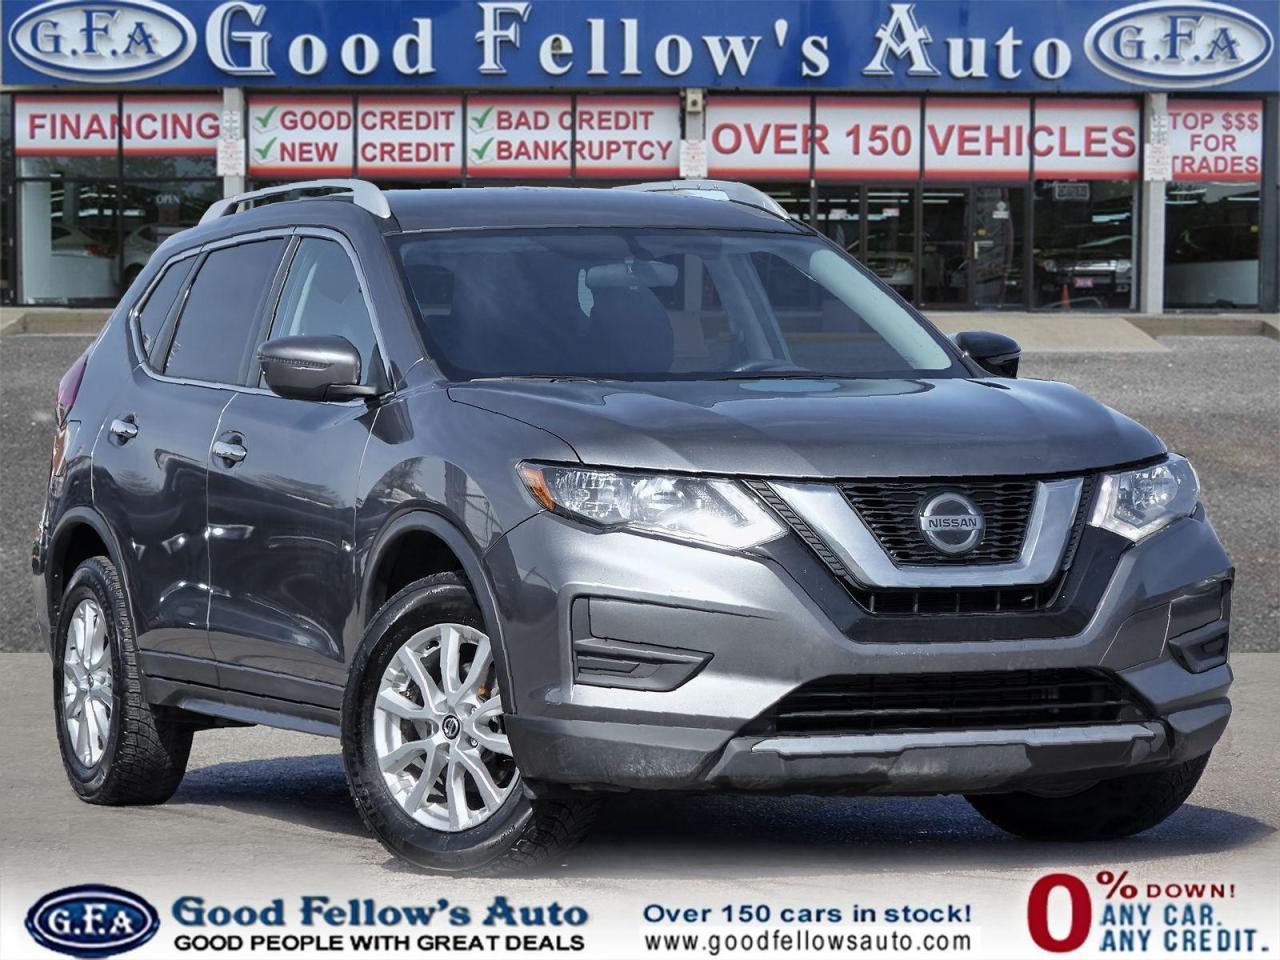 2020 Nissan Rogue SPECIAL EDITION, AWD, REARVIEW CAMERA, HEATED SEAT - Photo #1